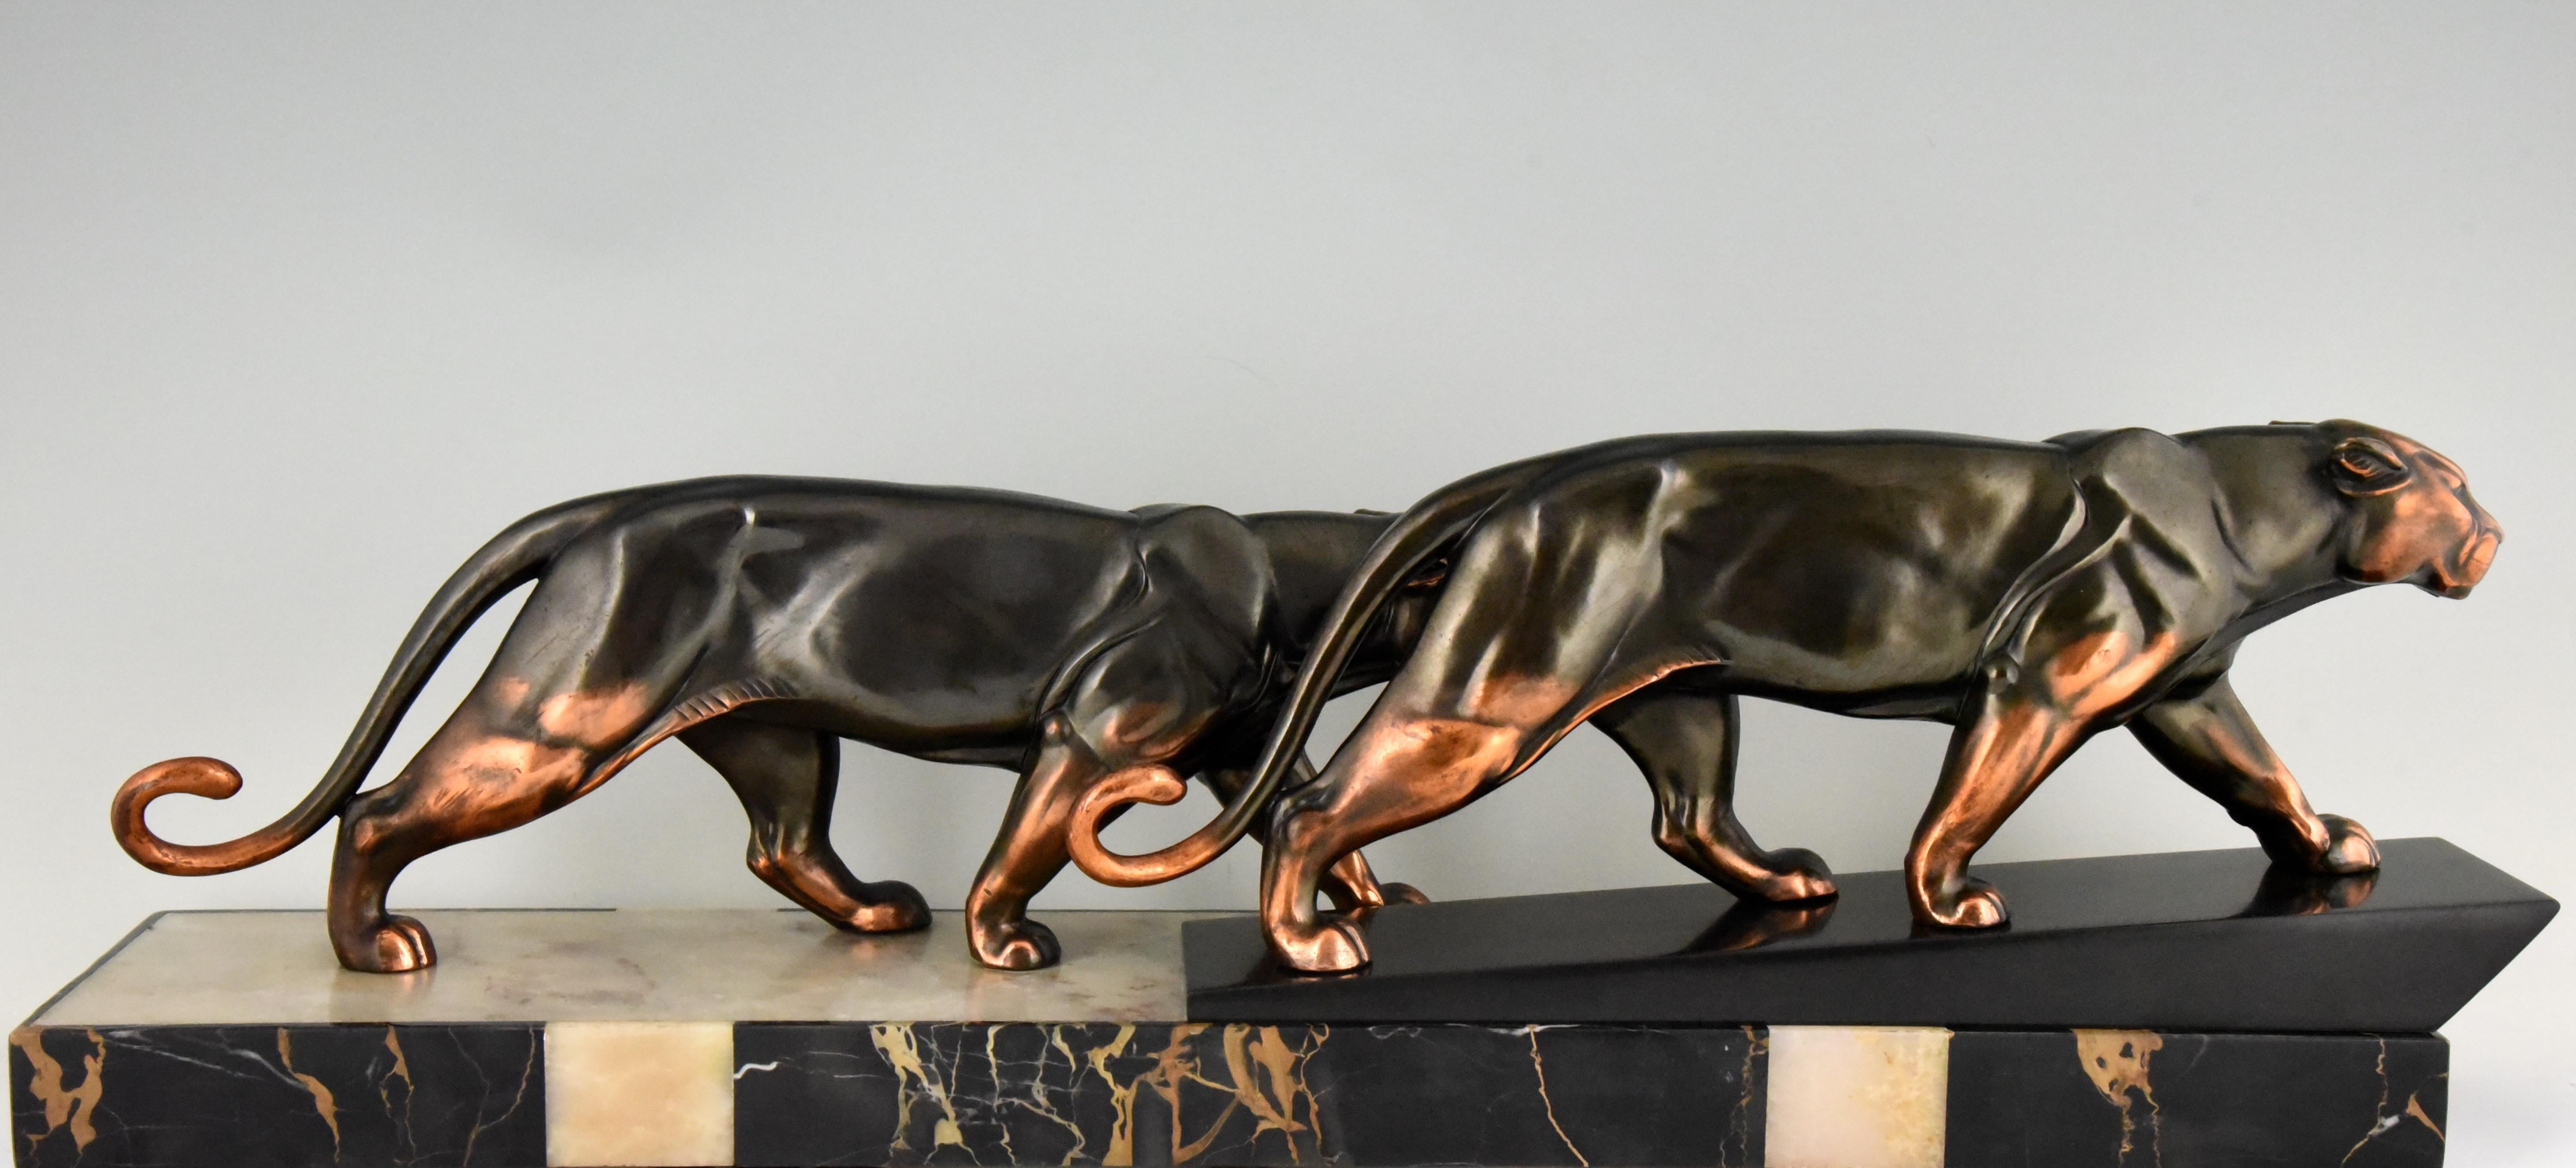 20th Century Art Deco Sculpture of Two Panthers Alexandre Ouline, France, 1930